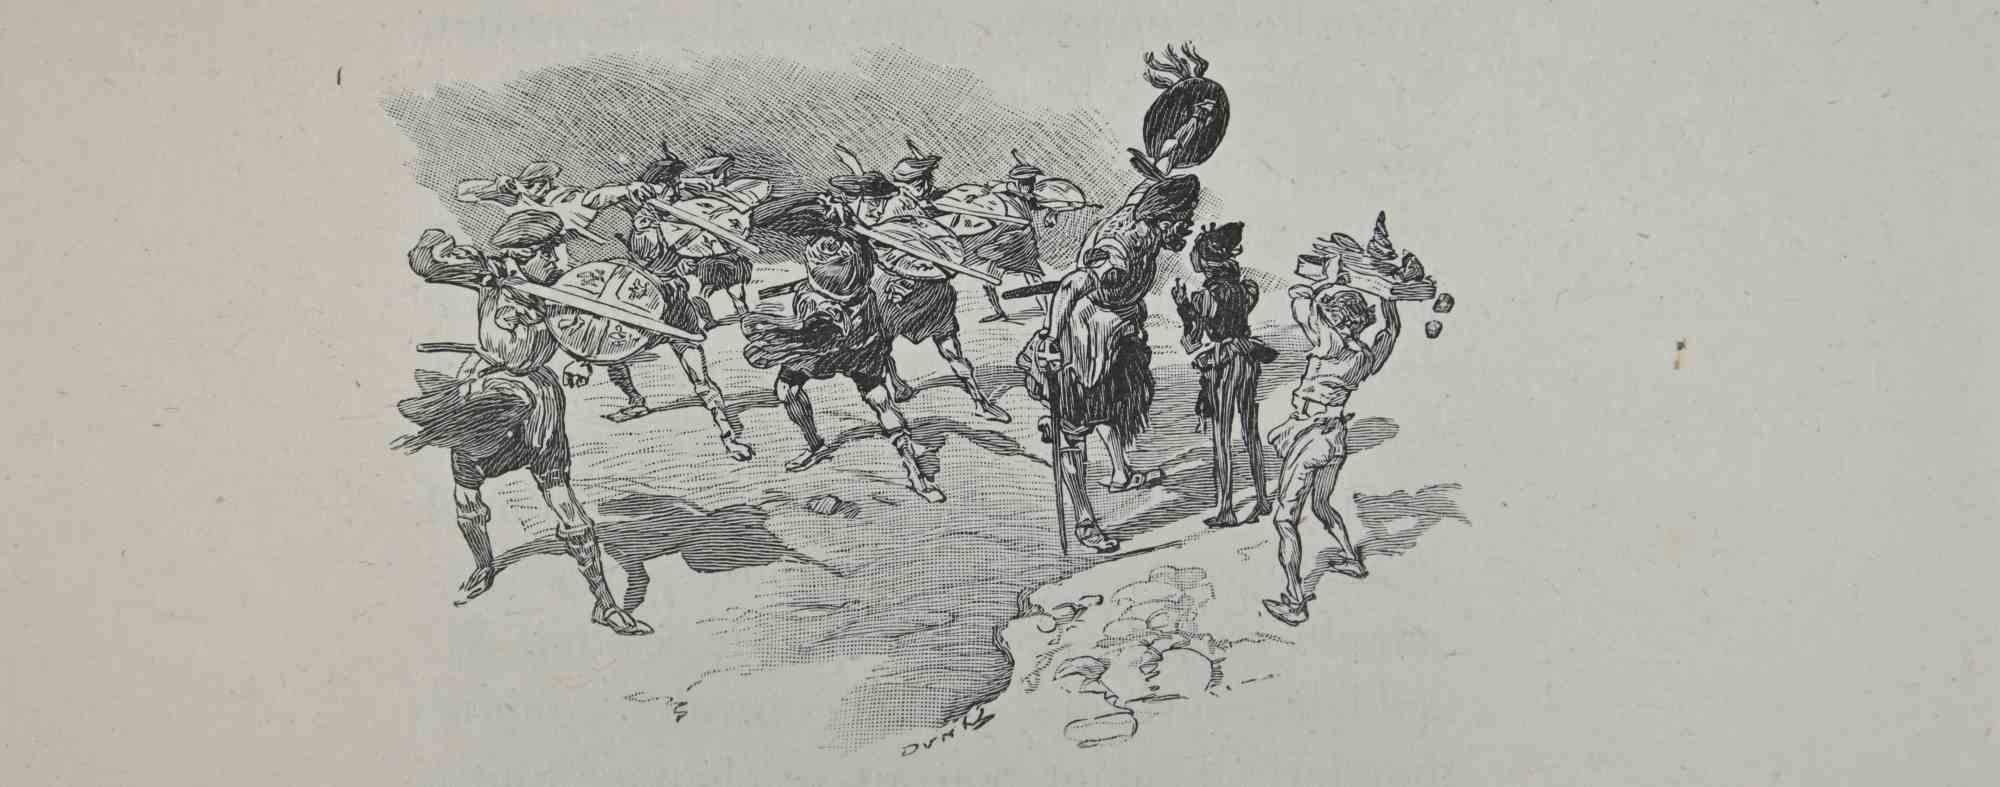 The Conflict - Lithograph by Hégésippe Moreau - Early 20th Century